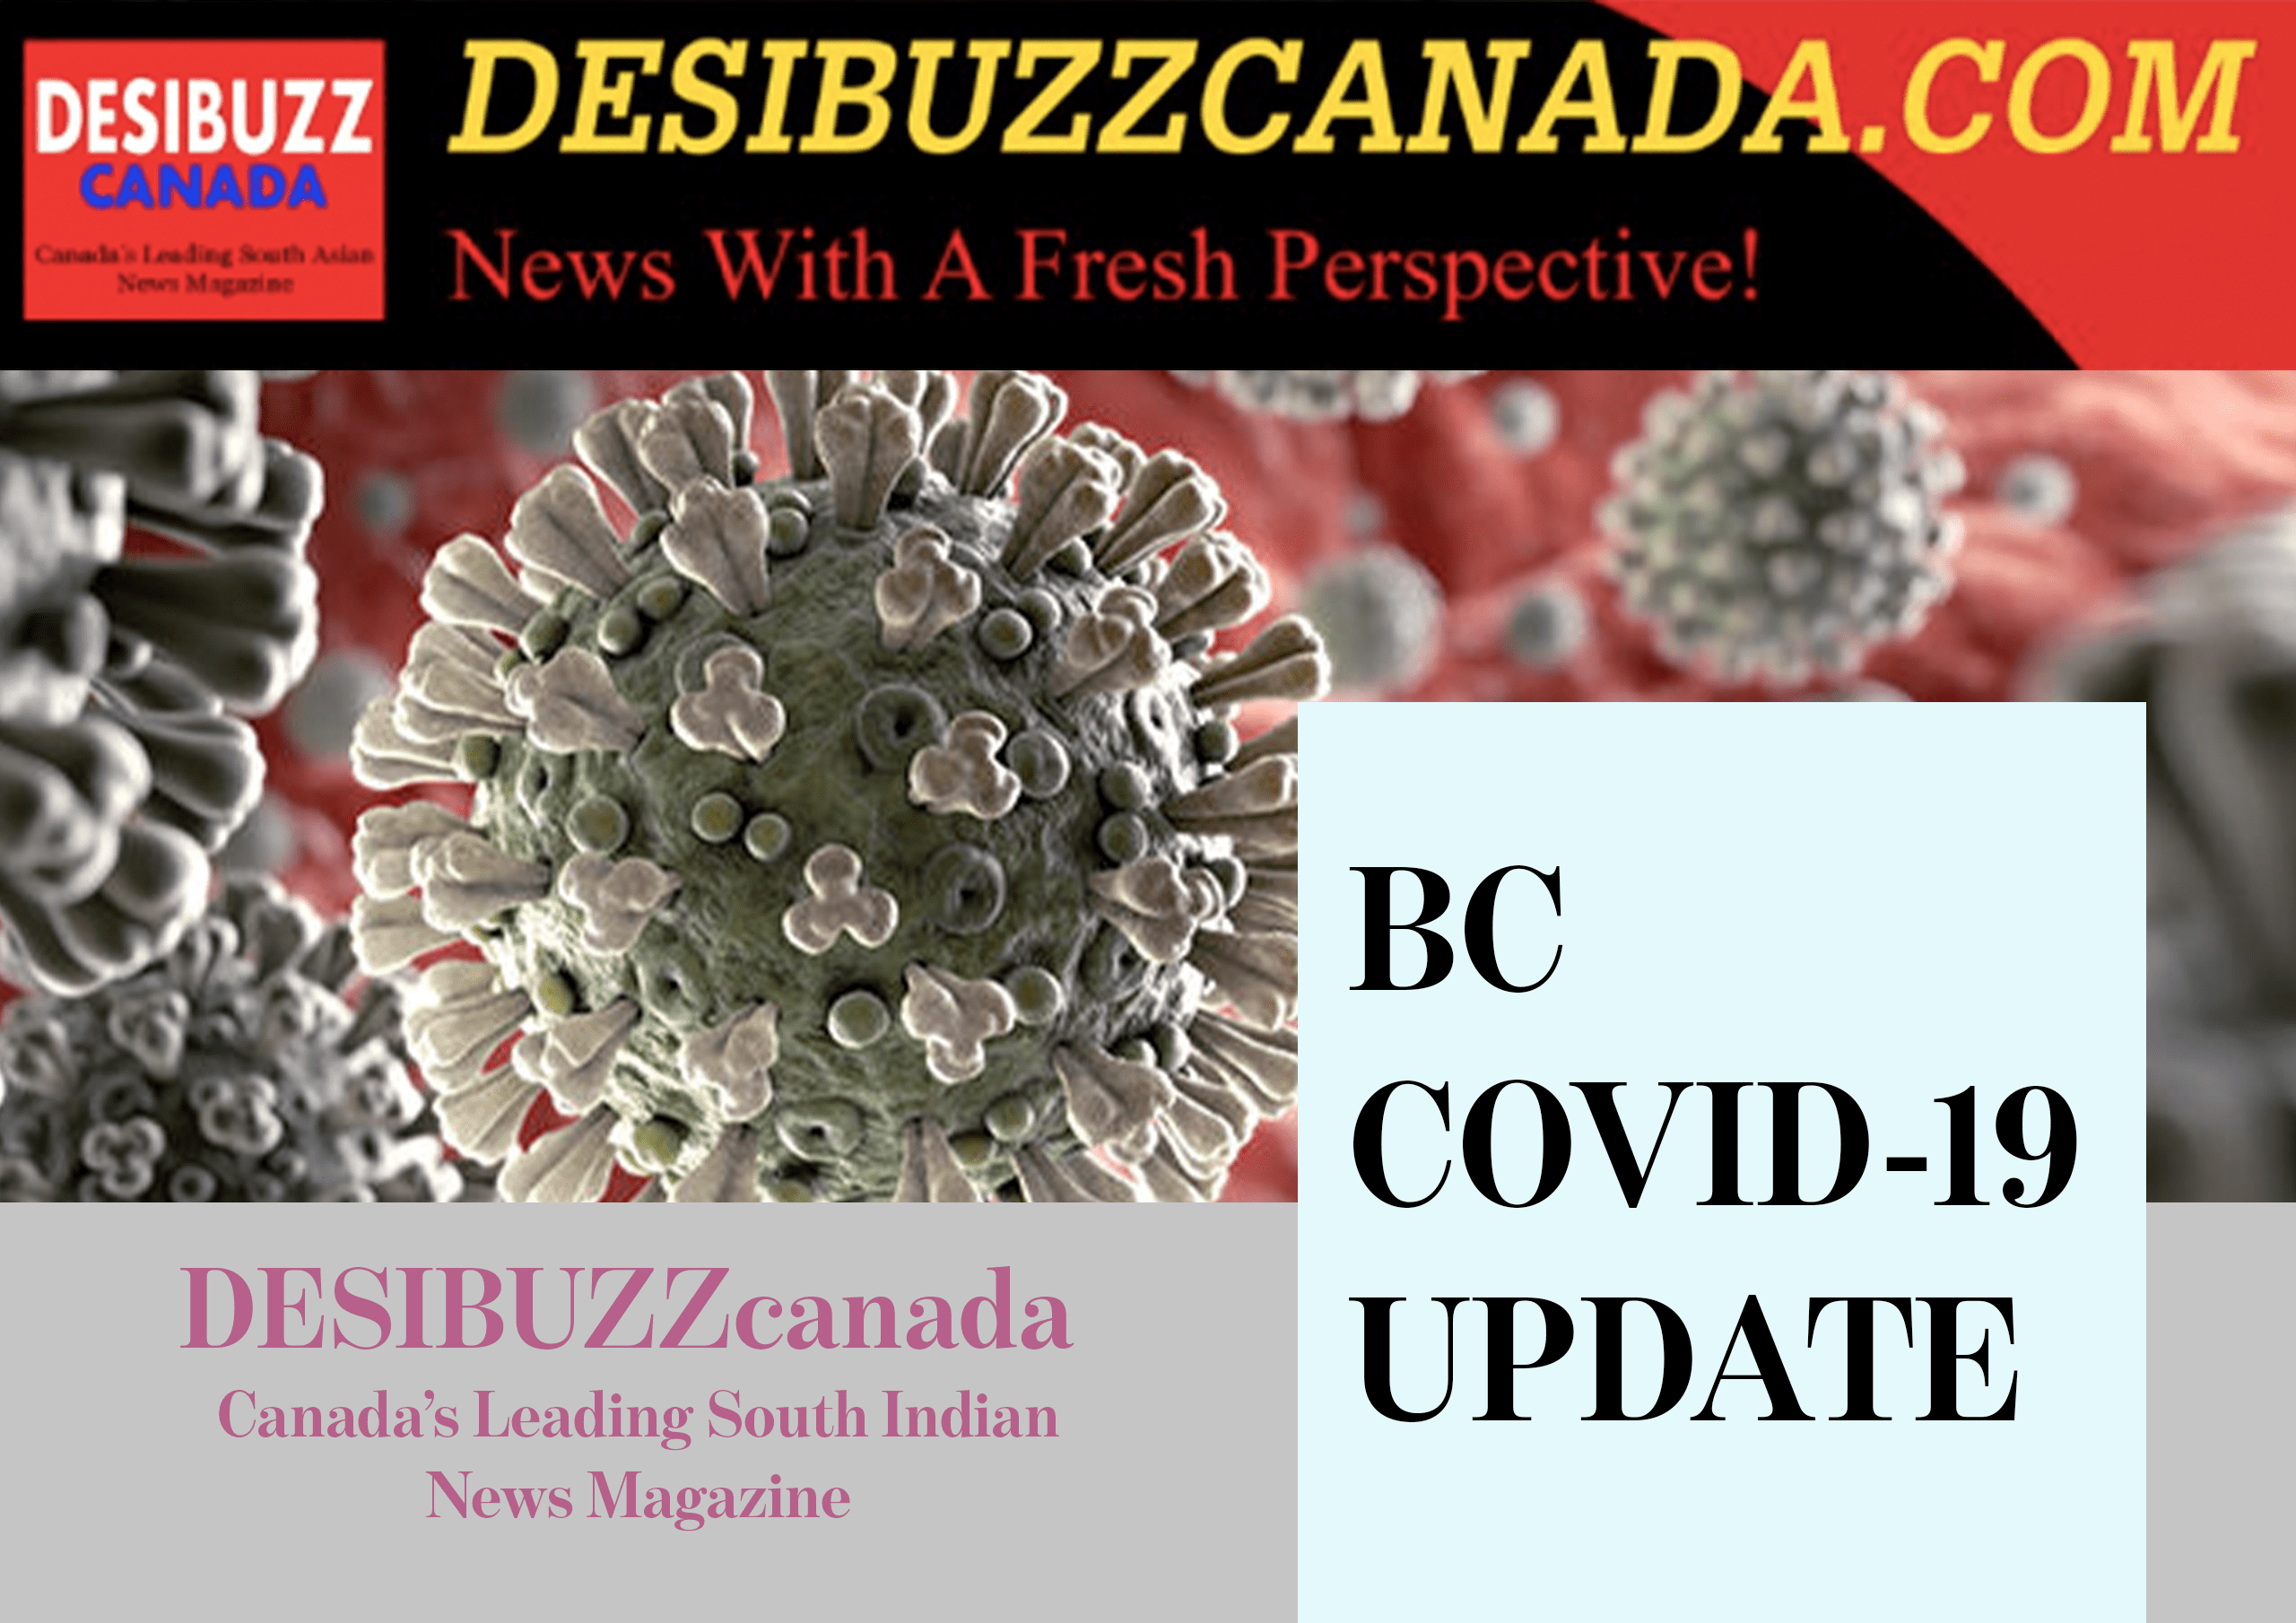 BC COVID-19 DAILY UPDATE: Cases Remain Low With One New Death Reported Friday